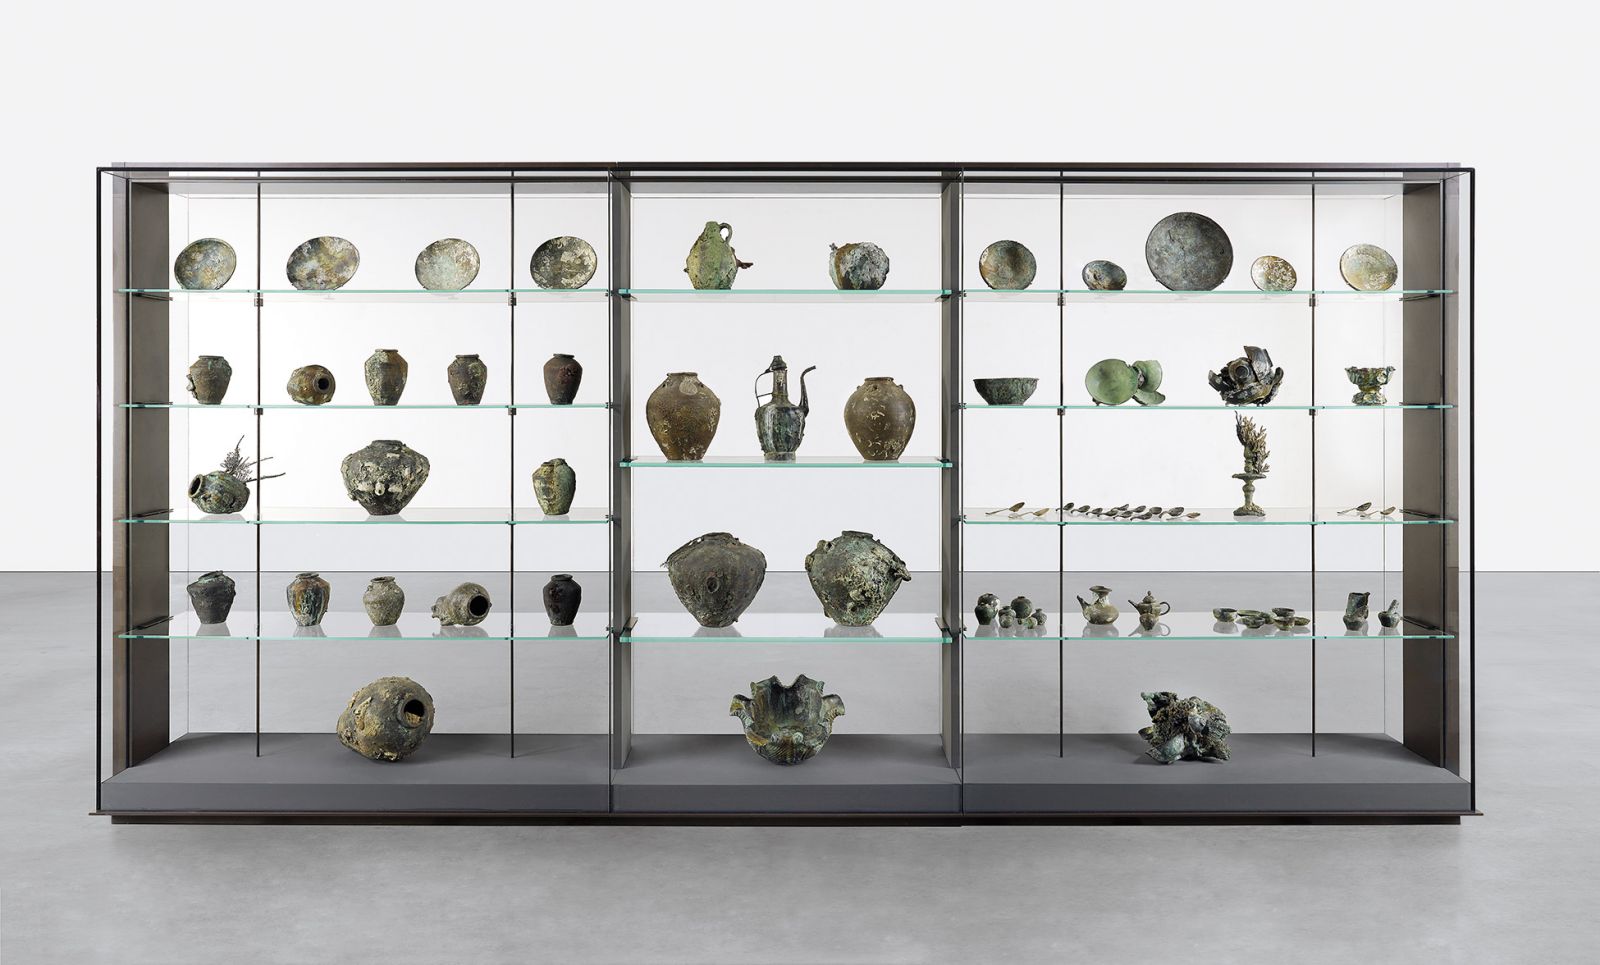 Fig. 4. Damien Hirst, <em>A Collection of Vessels from the Wreck of the “Unbelievable”</em> (Prudence Cuming Associates; © Damien Hirst and Science Ltd. All rights reserved, DACS/ARS 2017).